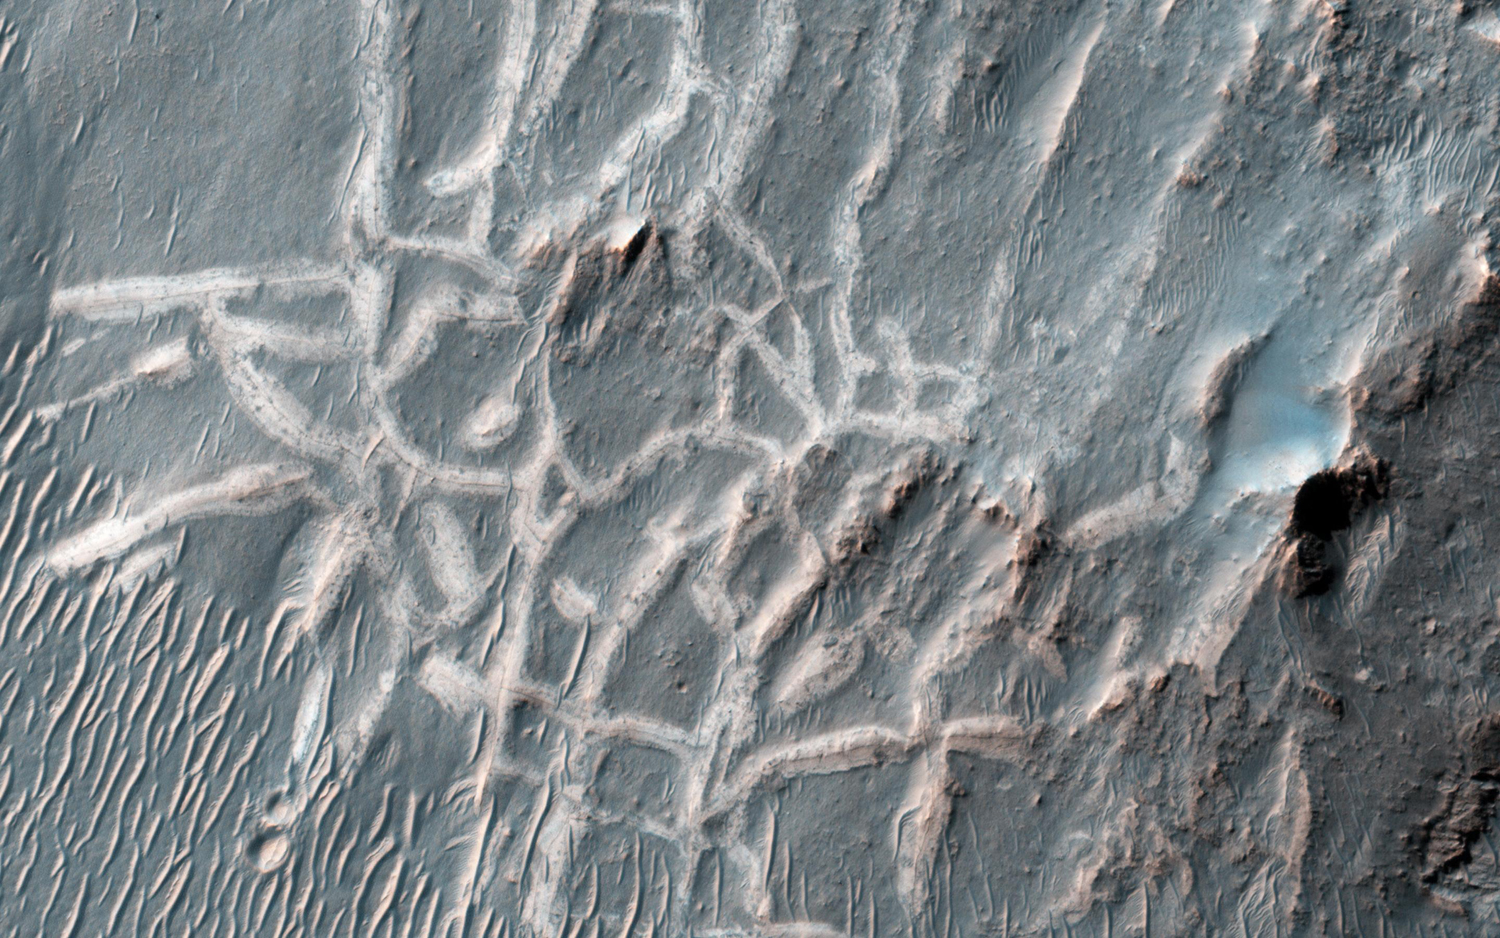 This image released on March 5, 2014 shows ridges east of Holden Crater on Mars, with hair-line fractures along the axis of each ridge. Scientists are not sure how they formed, but possible explanations suggest that mineral-rich ground water flowed out of the fractures and deposited minerals at or near the surface as the water evaporated.